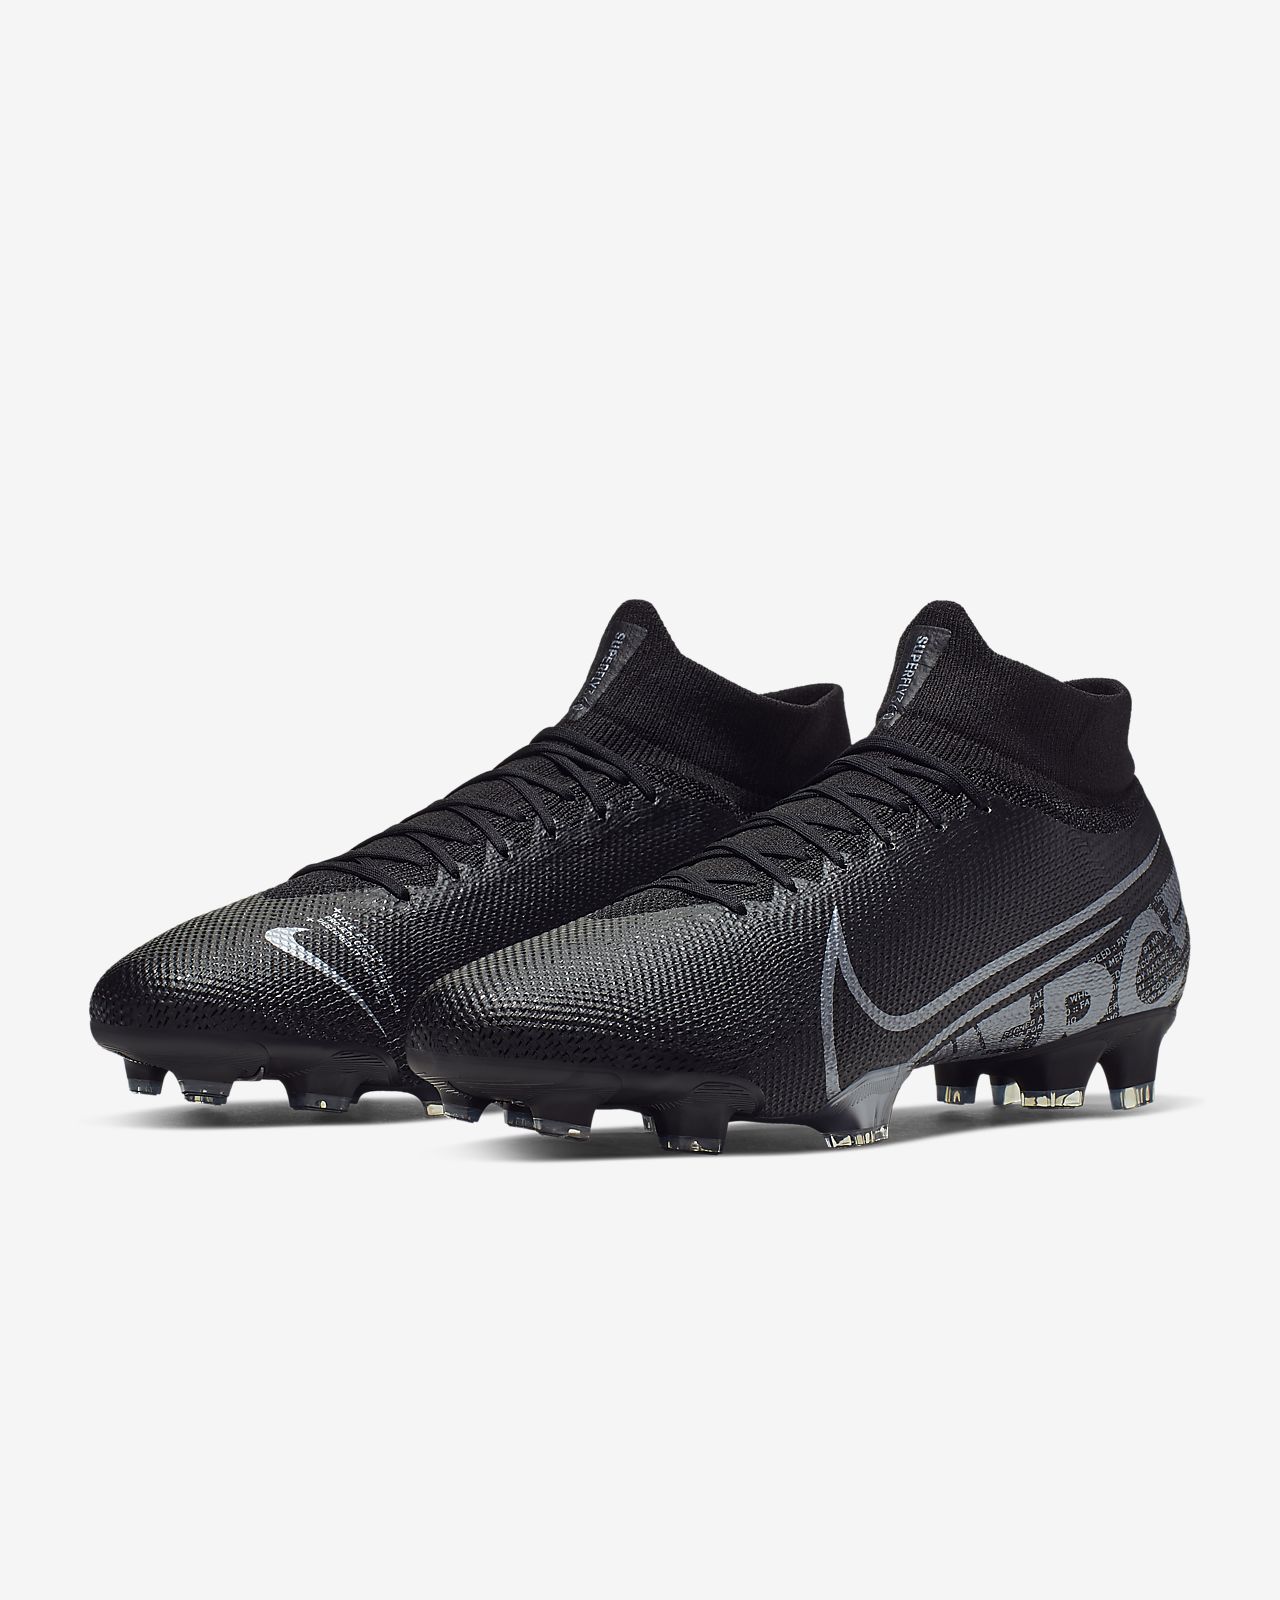 Nike Mercurial Superfly VI Academy SG PRO in 2019 Pinterest